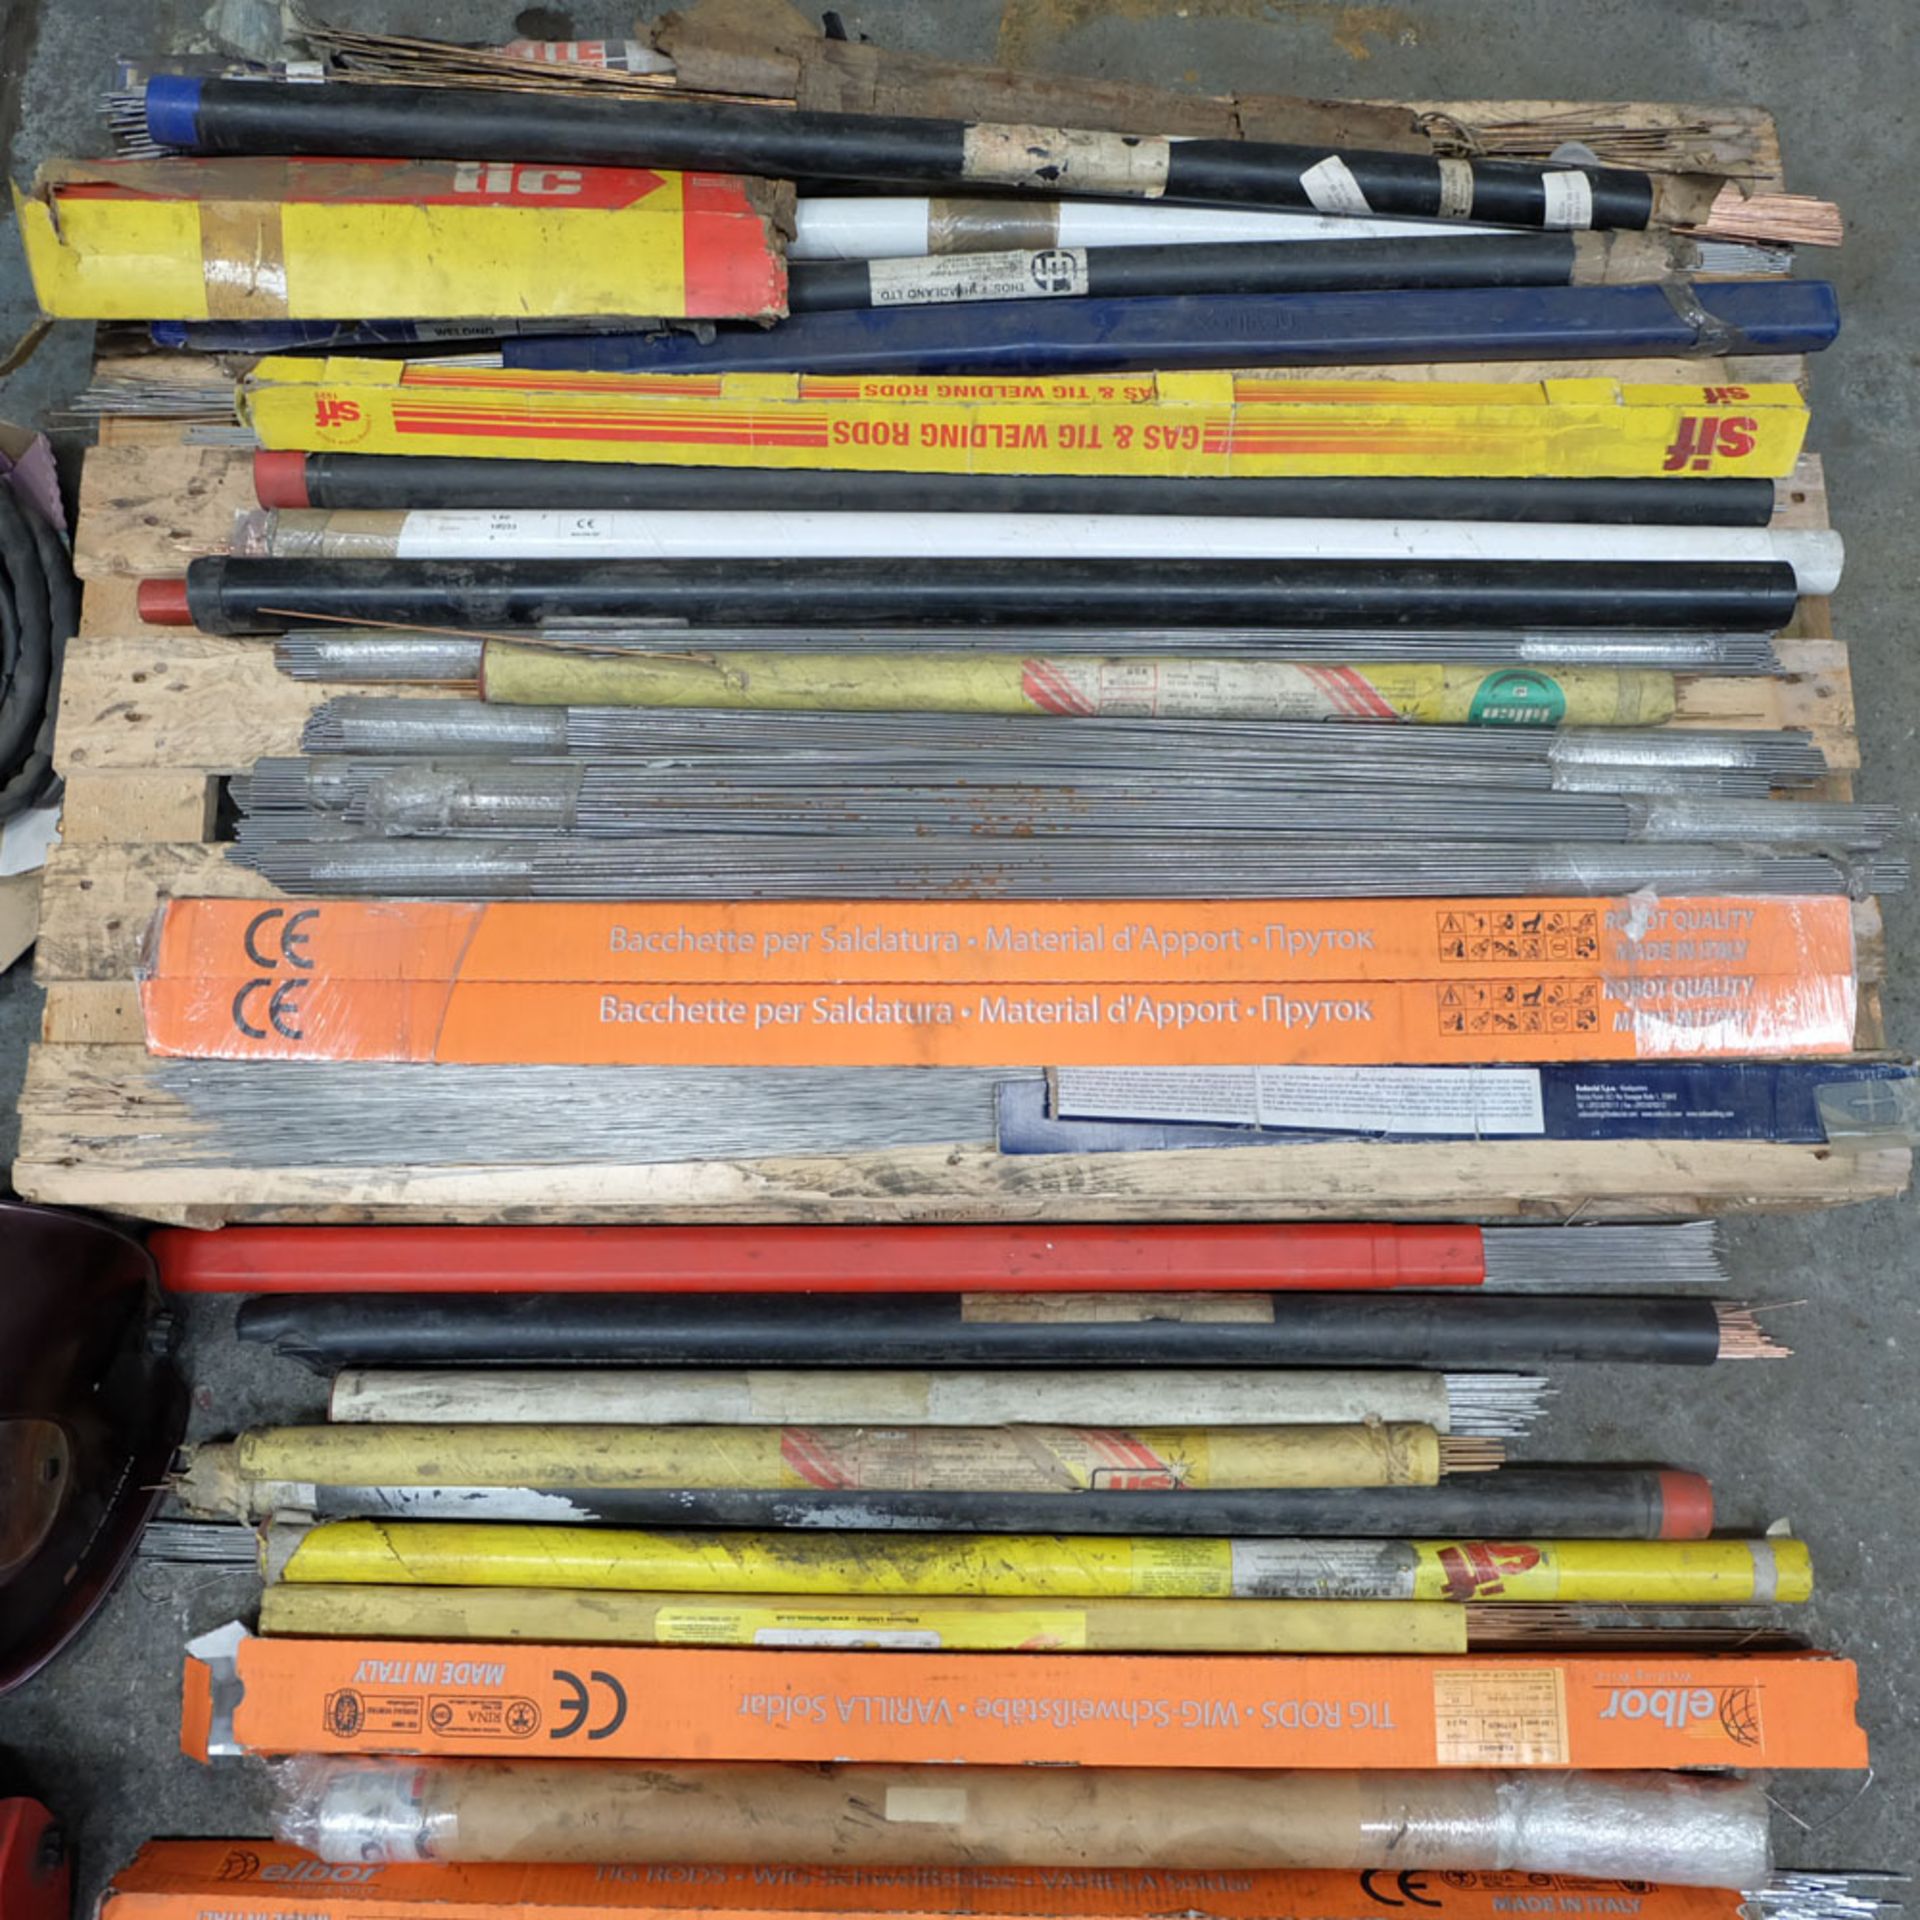 Large Lot of Various Welding Equipment including Welding Rods and Welding Masks. - Image 6 of 11